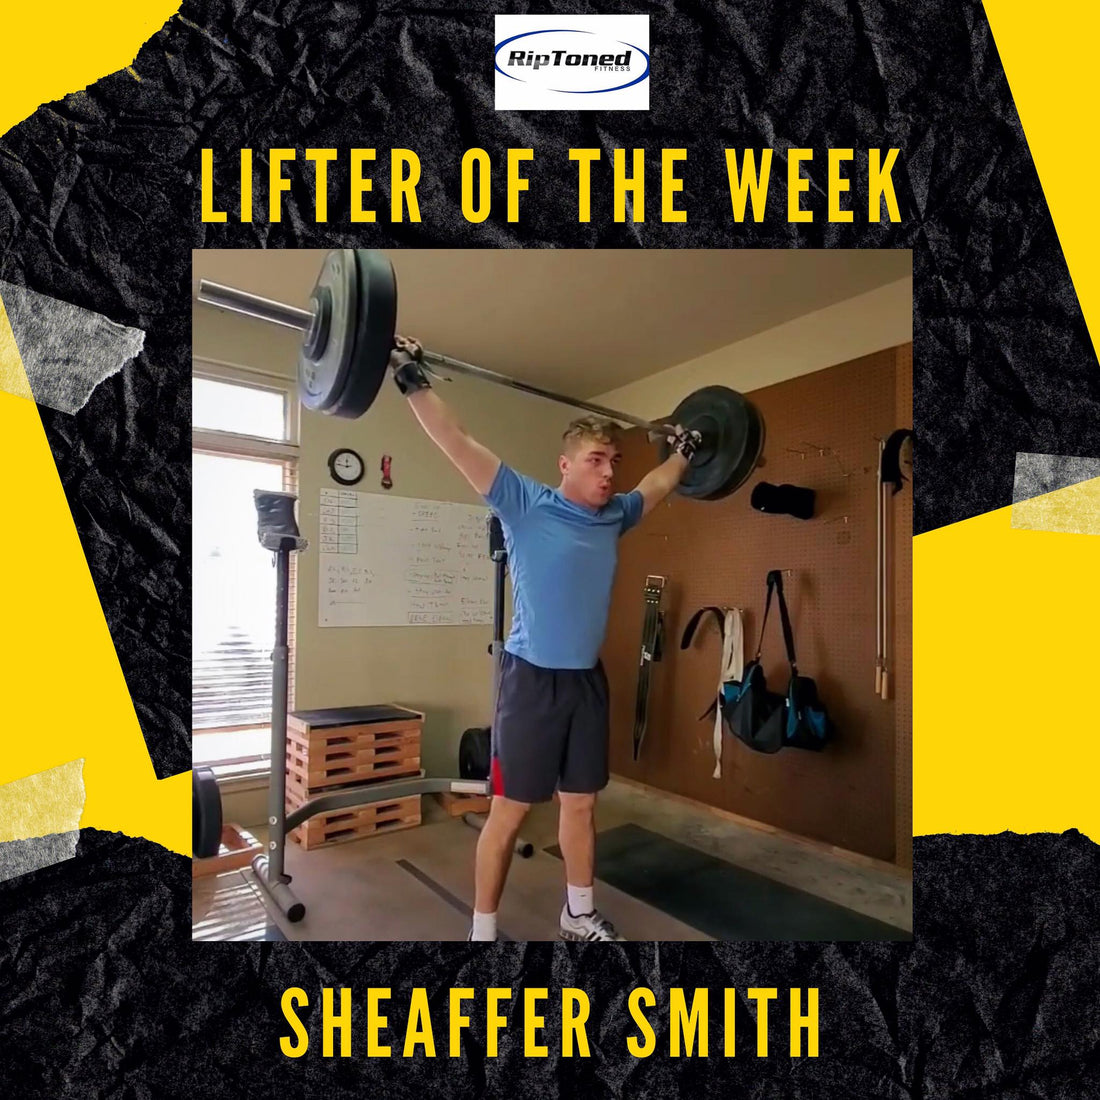 Lifter of the Week -  Sheaffer Smith - Rip Toned